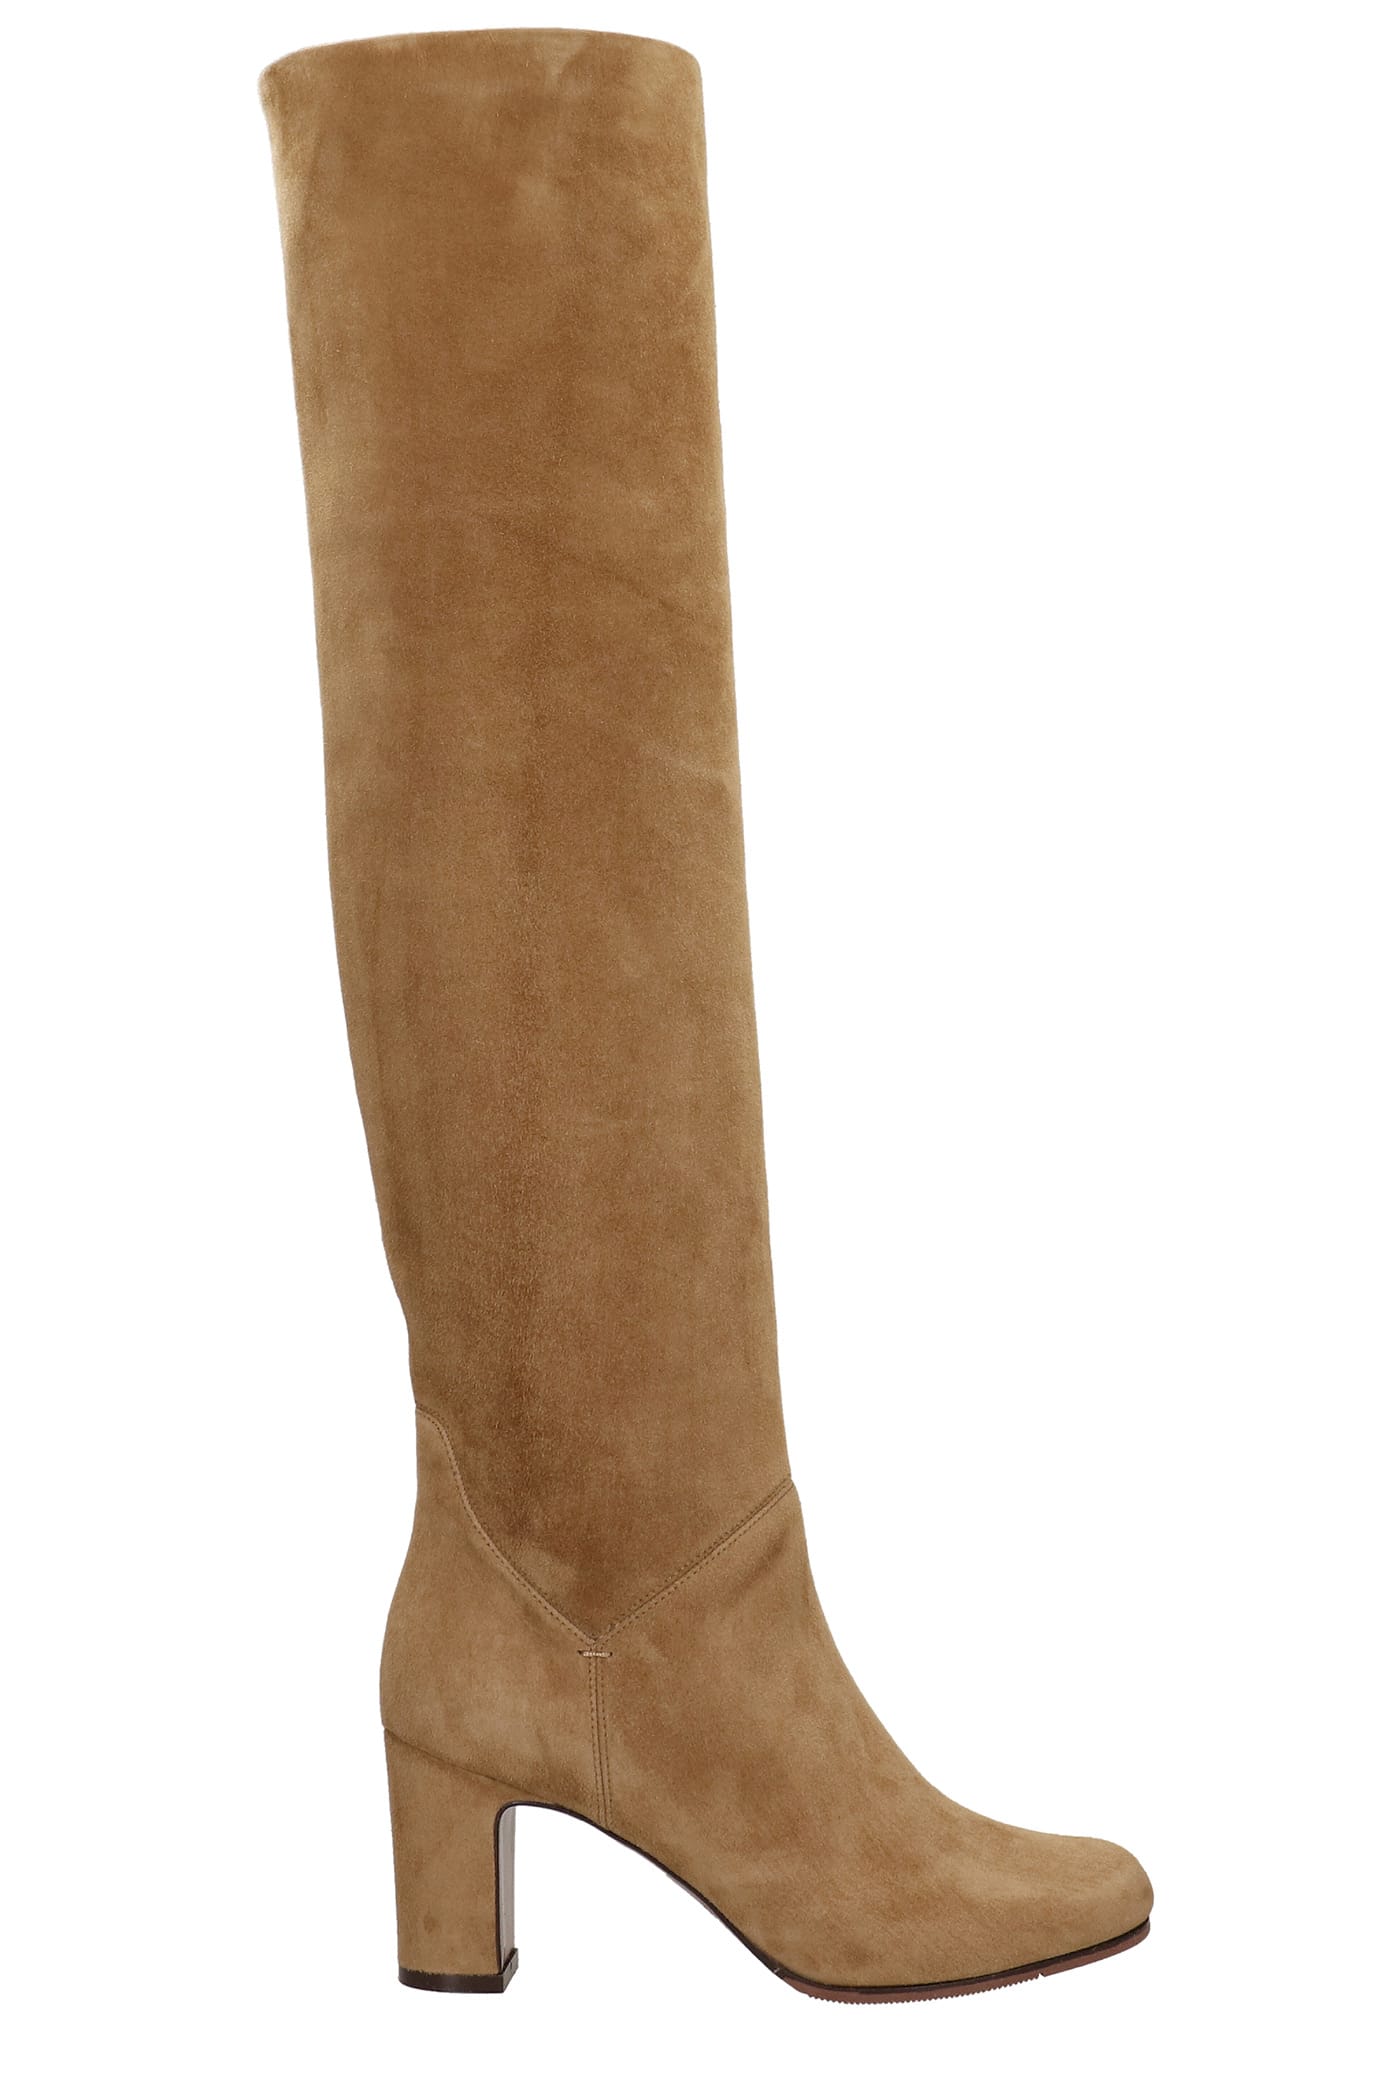 LAutre Chose High Heels Boots In Camel Suede